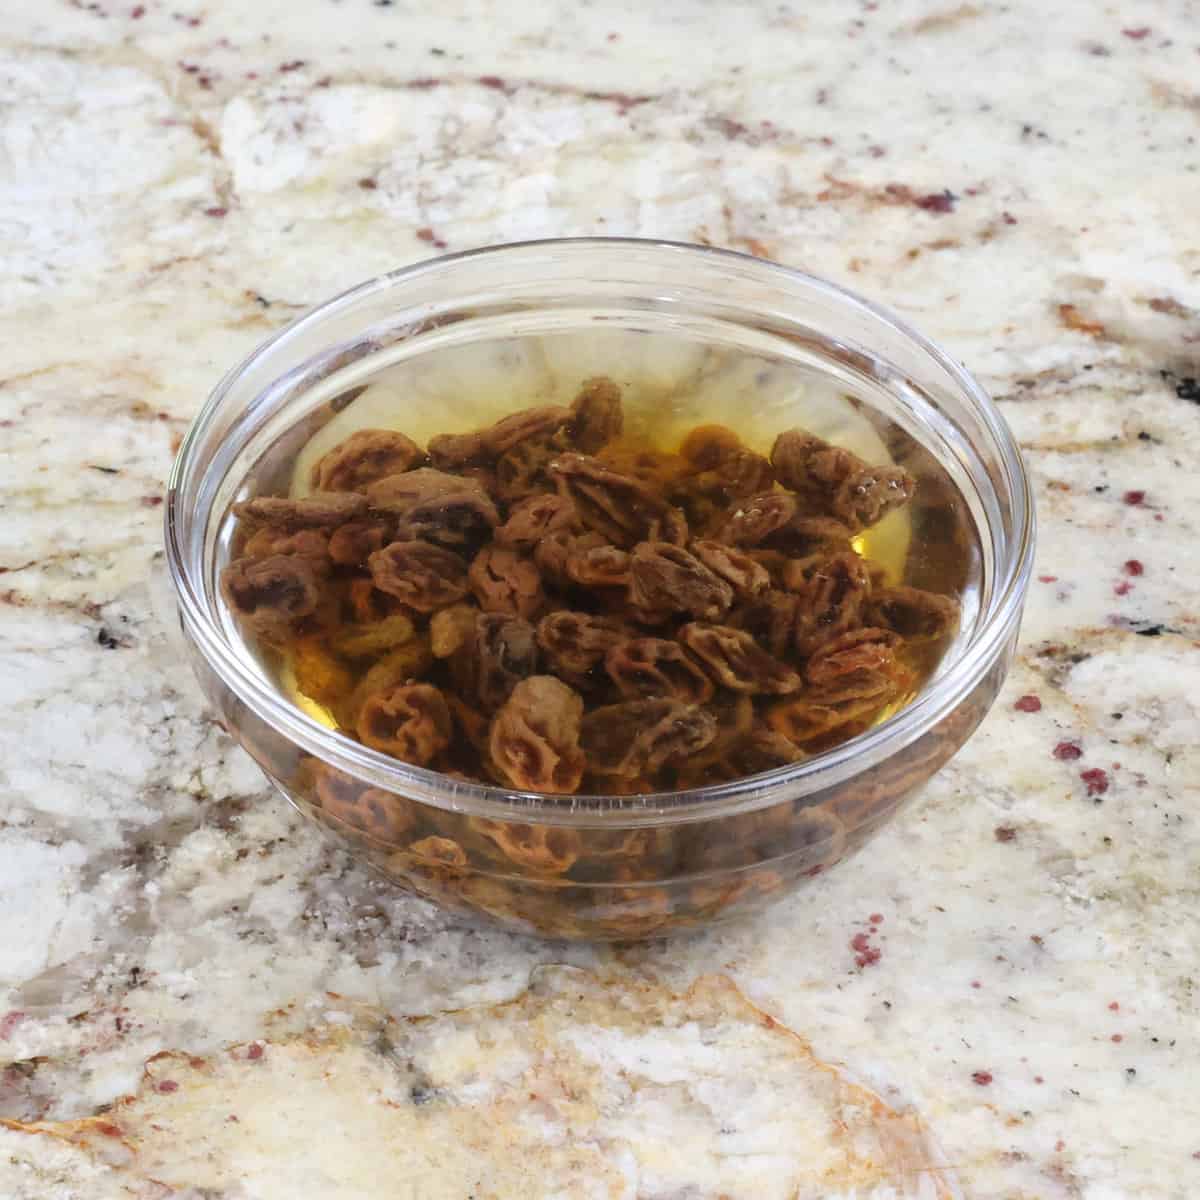 raisins soaking in hot water on a kitchen counter